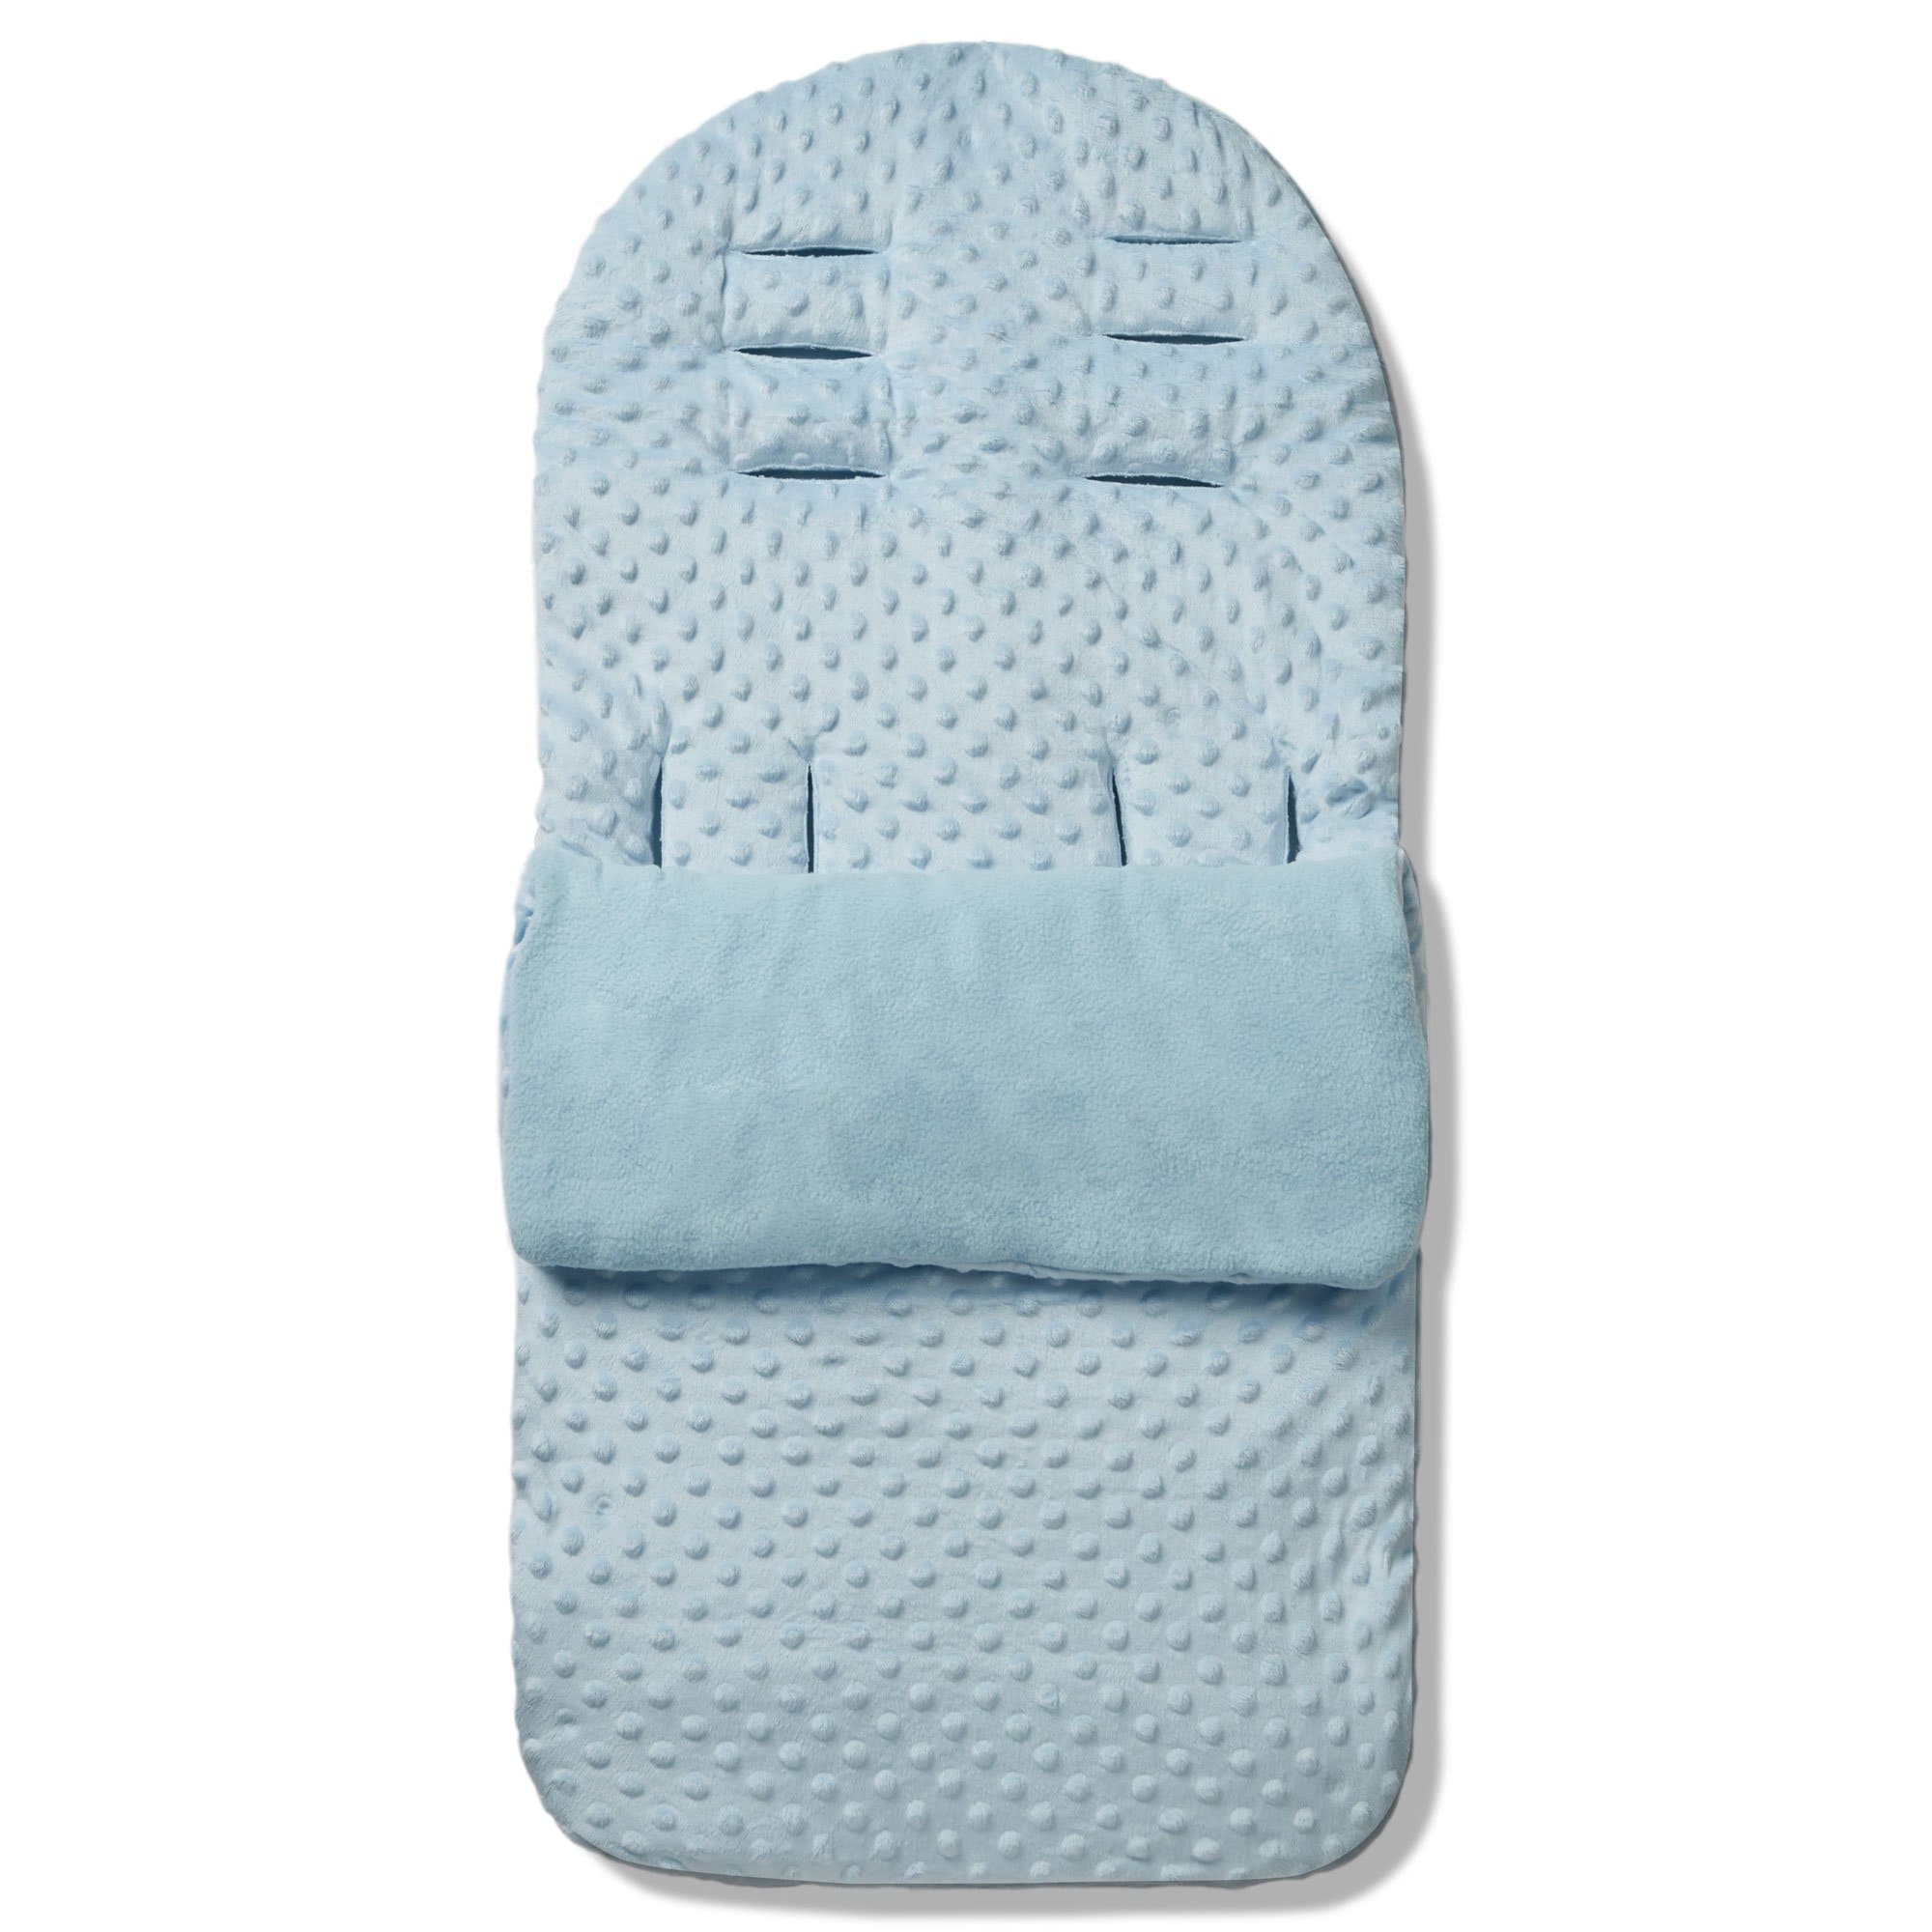 Dimple Footmuff / Cosy Toes Compatible with Cosatto - Blue / Fits All Models | For Your Little One